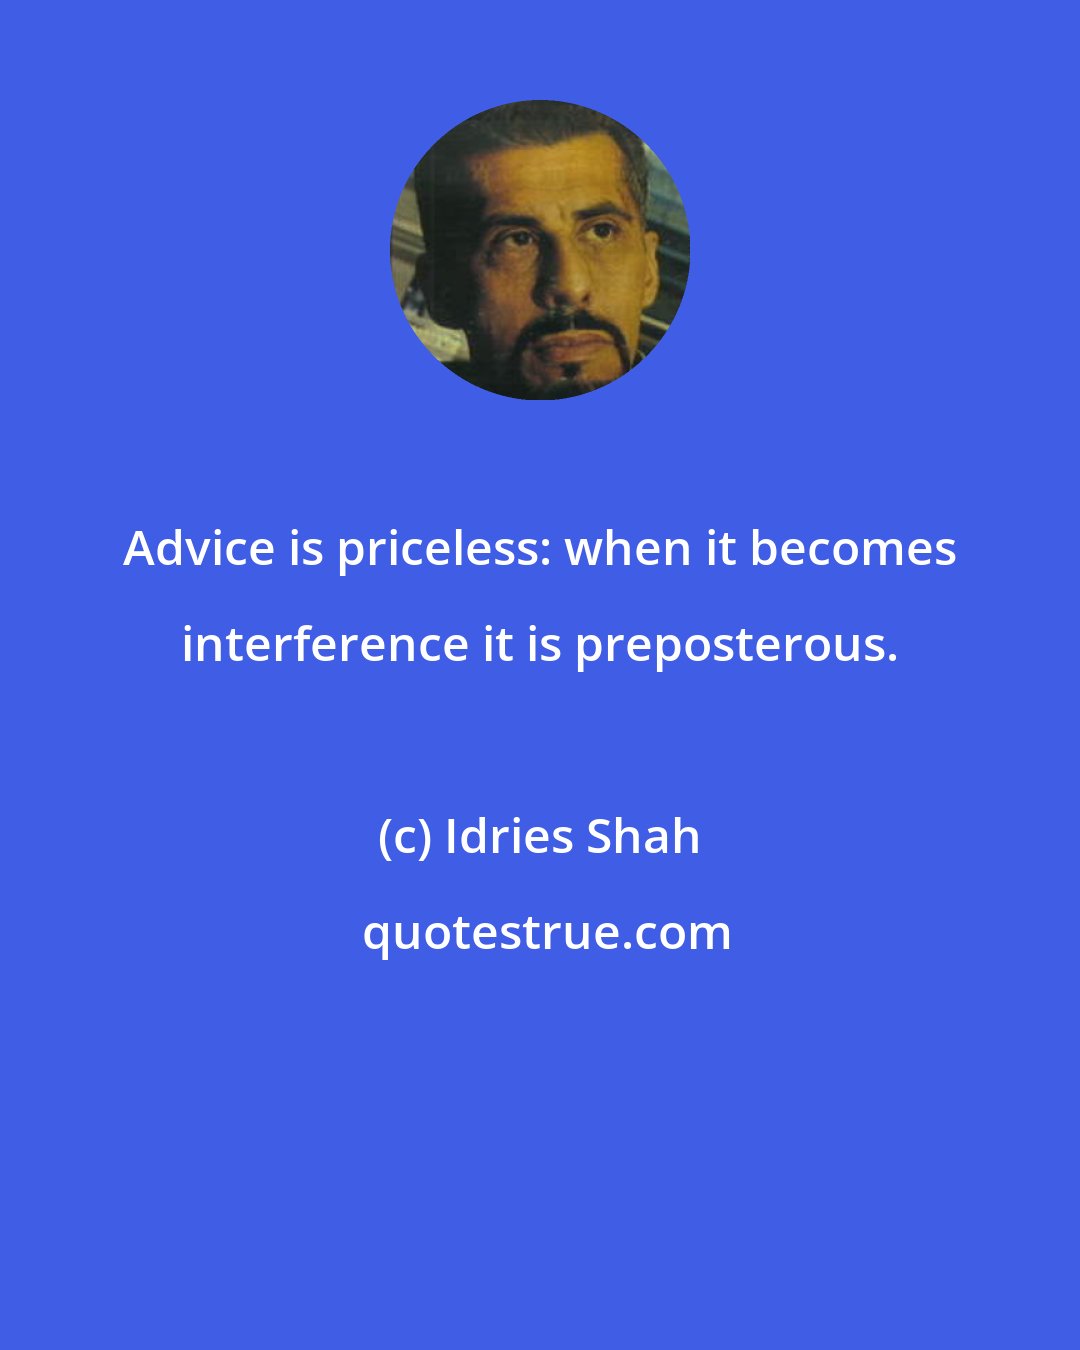 Idries Shah: Advice is priceless: when it becomes interference it is preposterous.